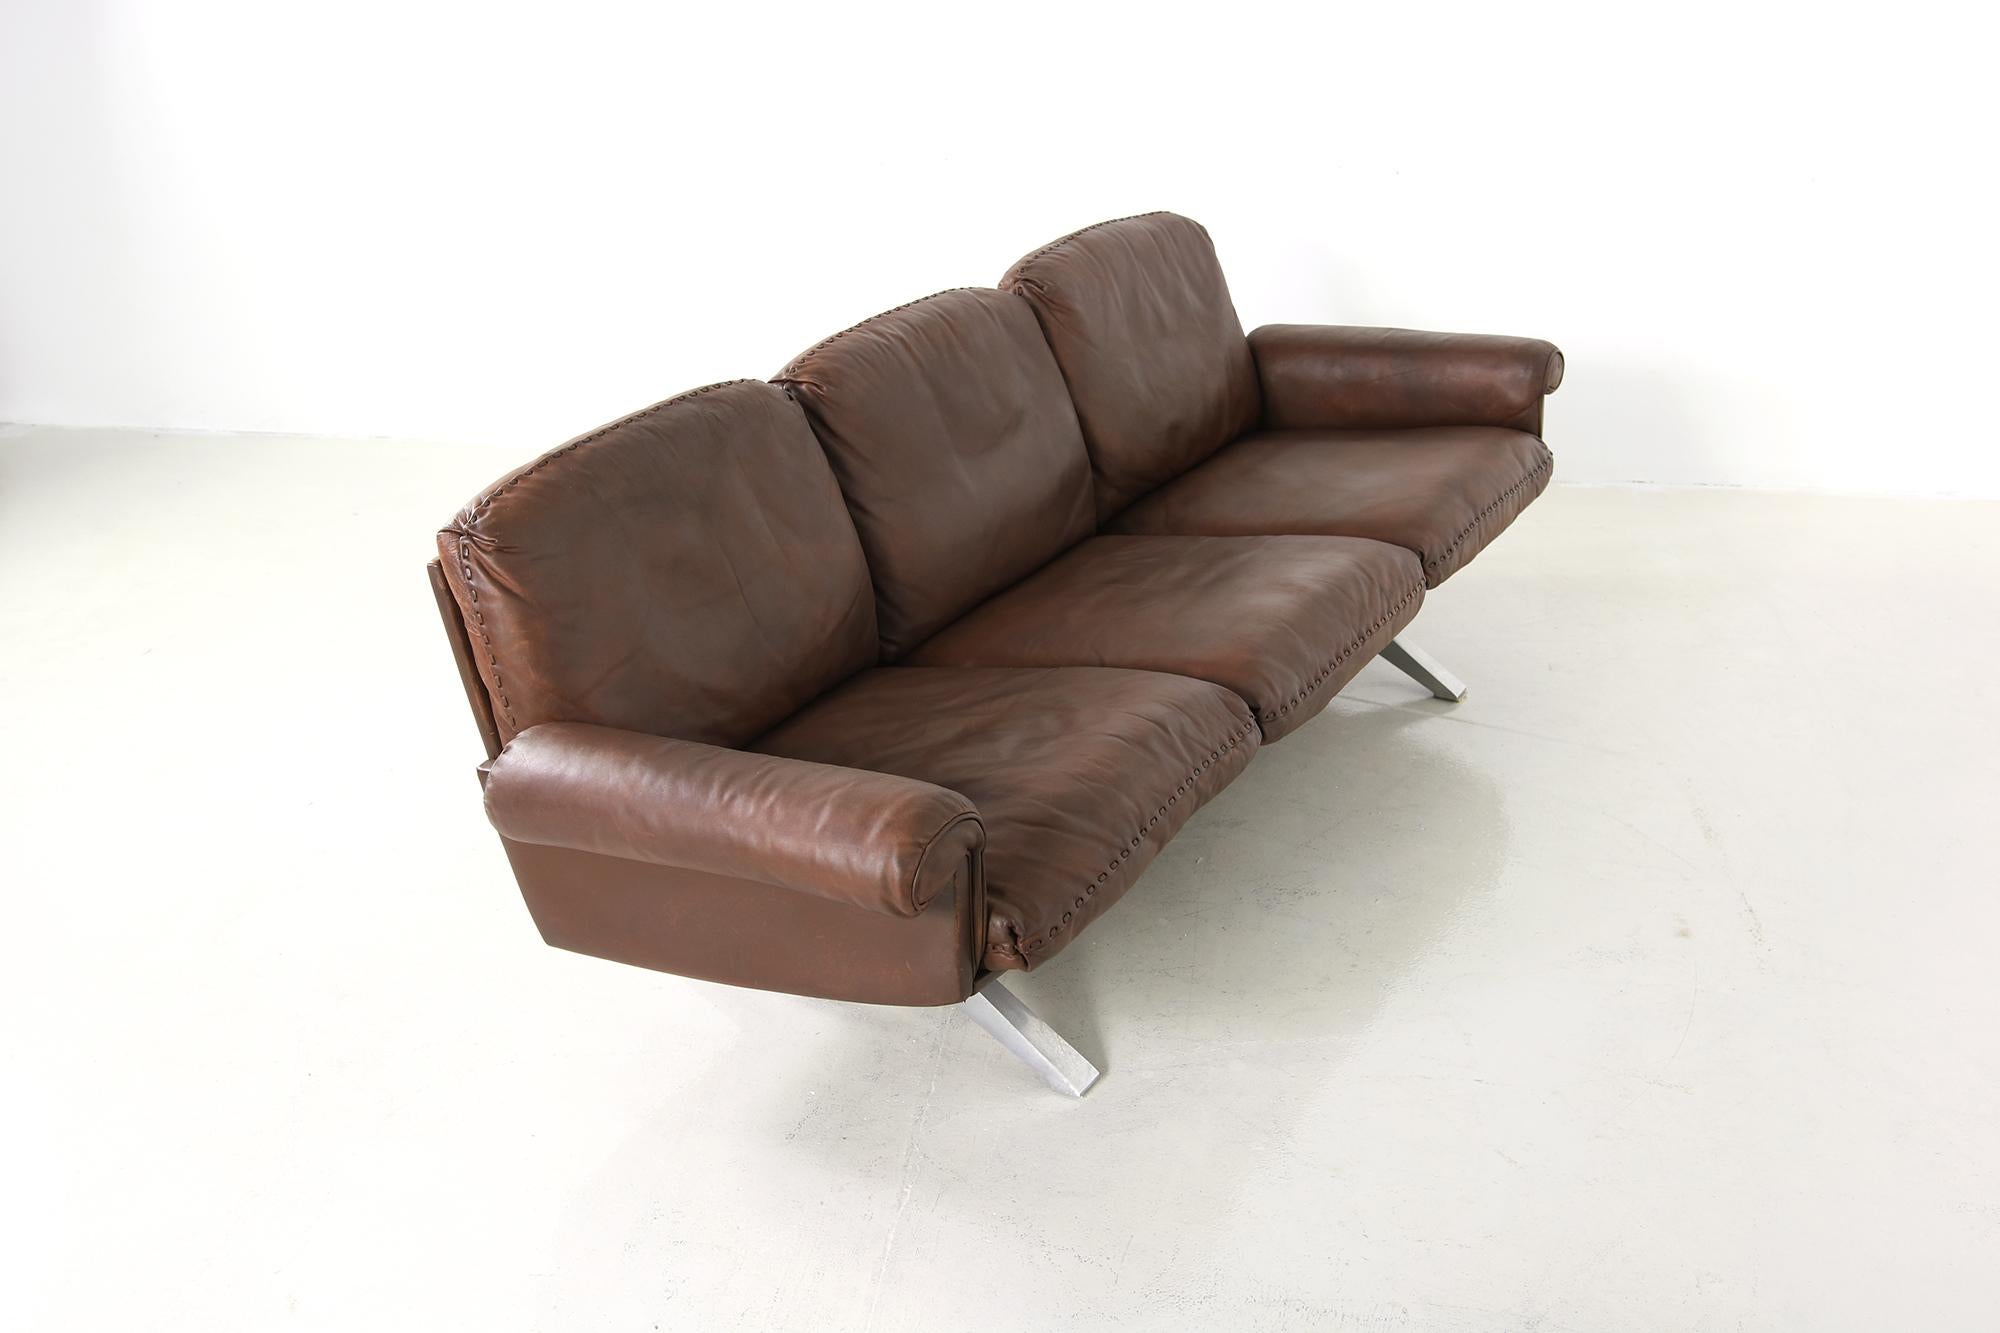 Beautiful vintage sofa, manufactured in the early 1970s by De Sede Switzerland, Mod. DS 31 a three-seat sofa in a great quality, beautiful brown leather, authentic 1970s object in good vintage condition, with unique patina on the leather. Very nice